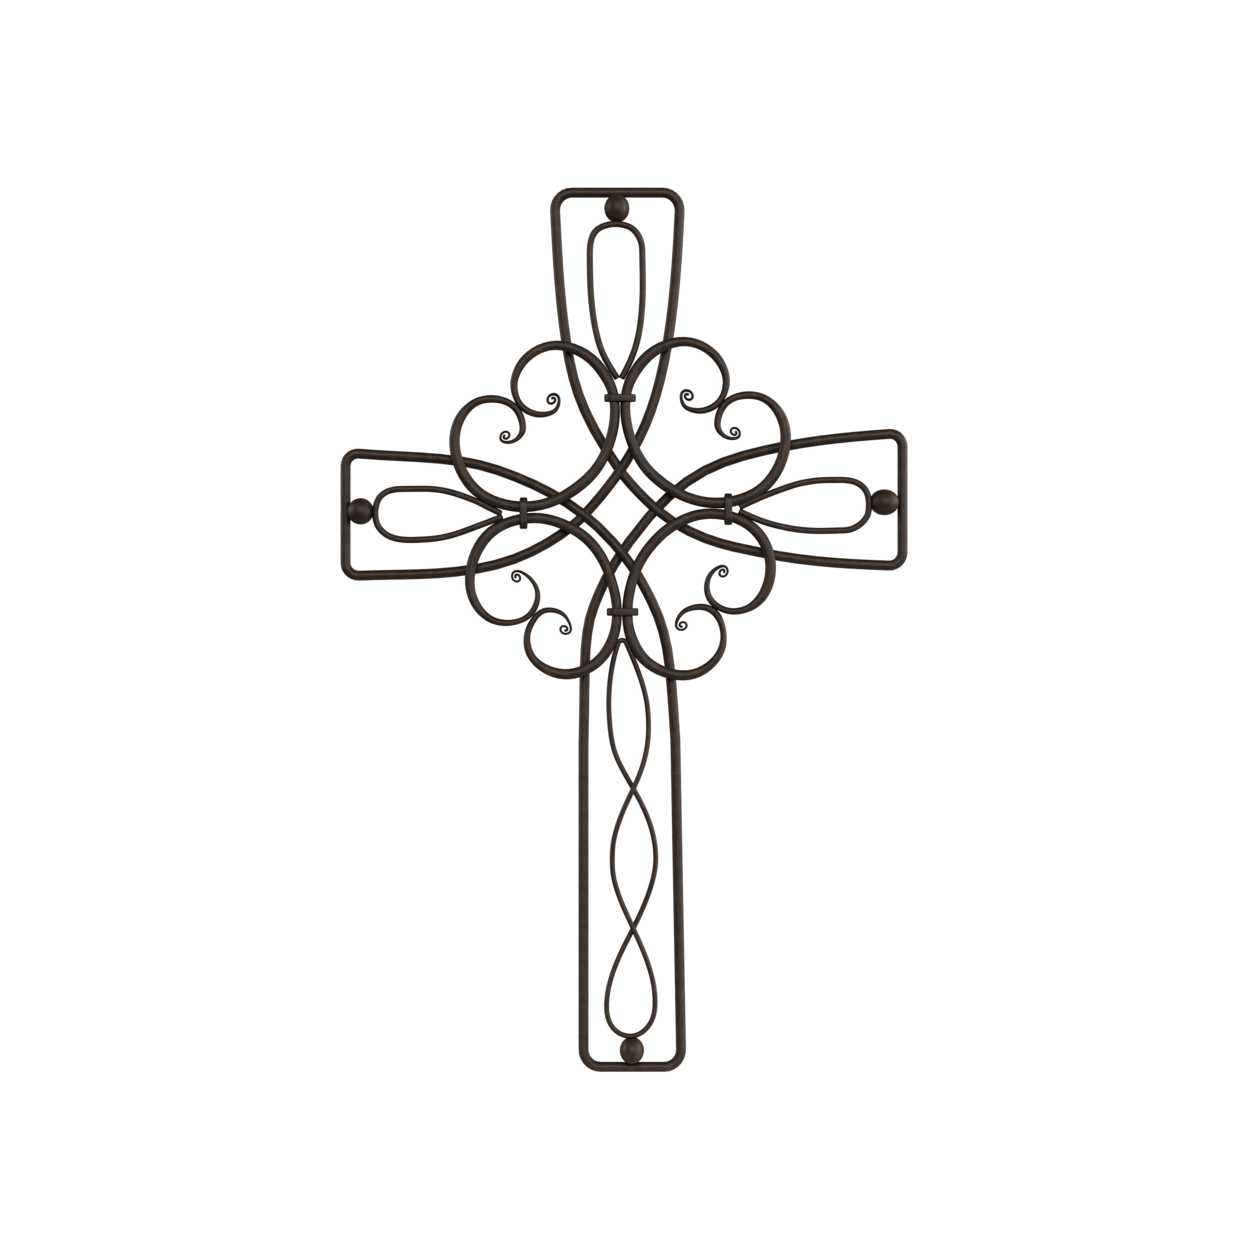 Metal Wall Cross With Decorative Floral Scroll Design- Rustic Handcrafted Religious Wall Art For Decor In Living Room, Bedroom